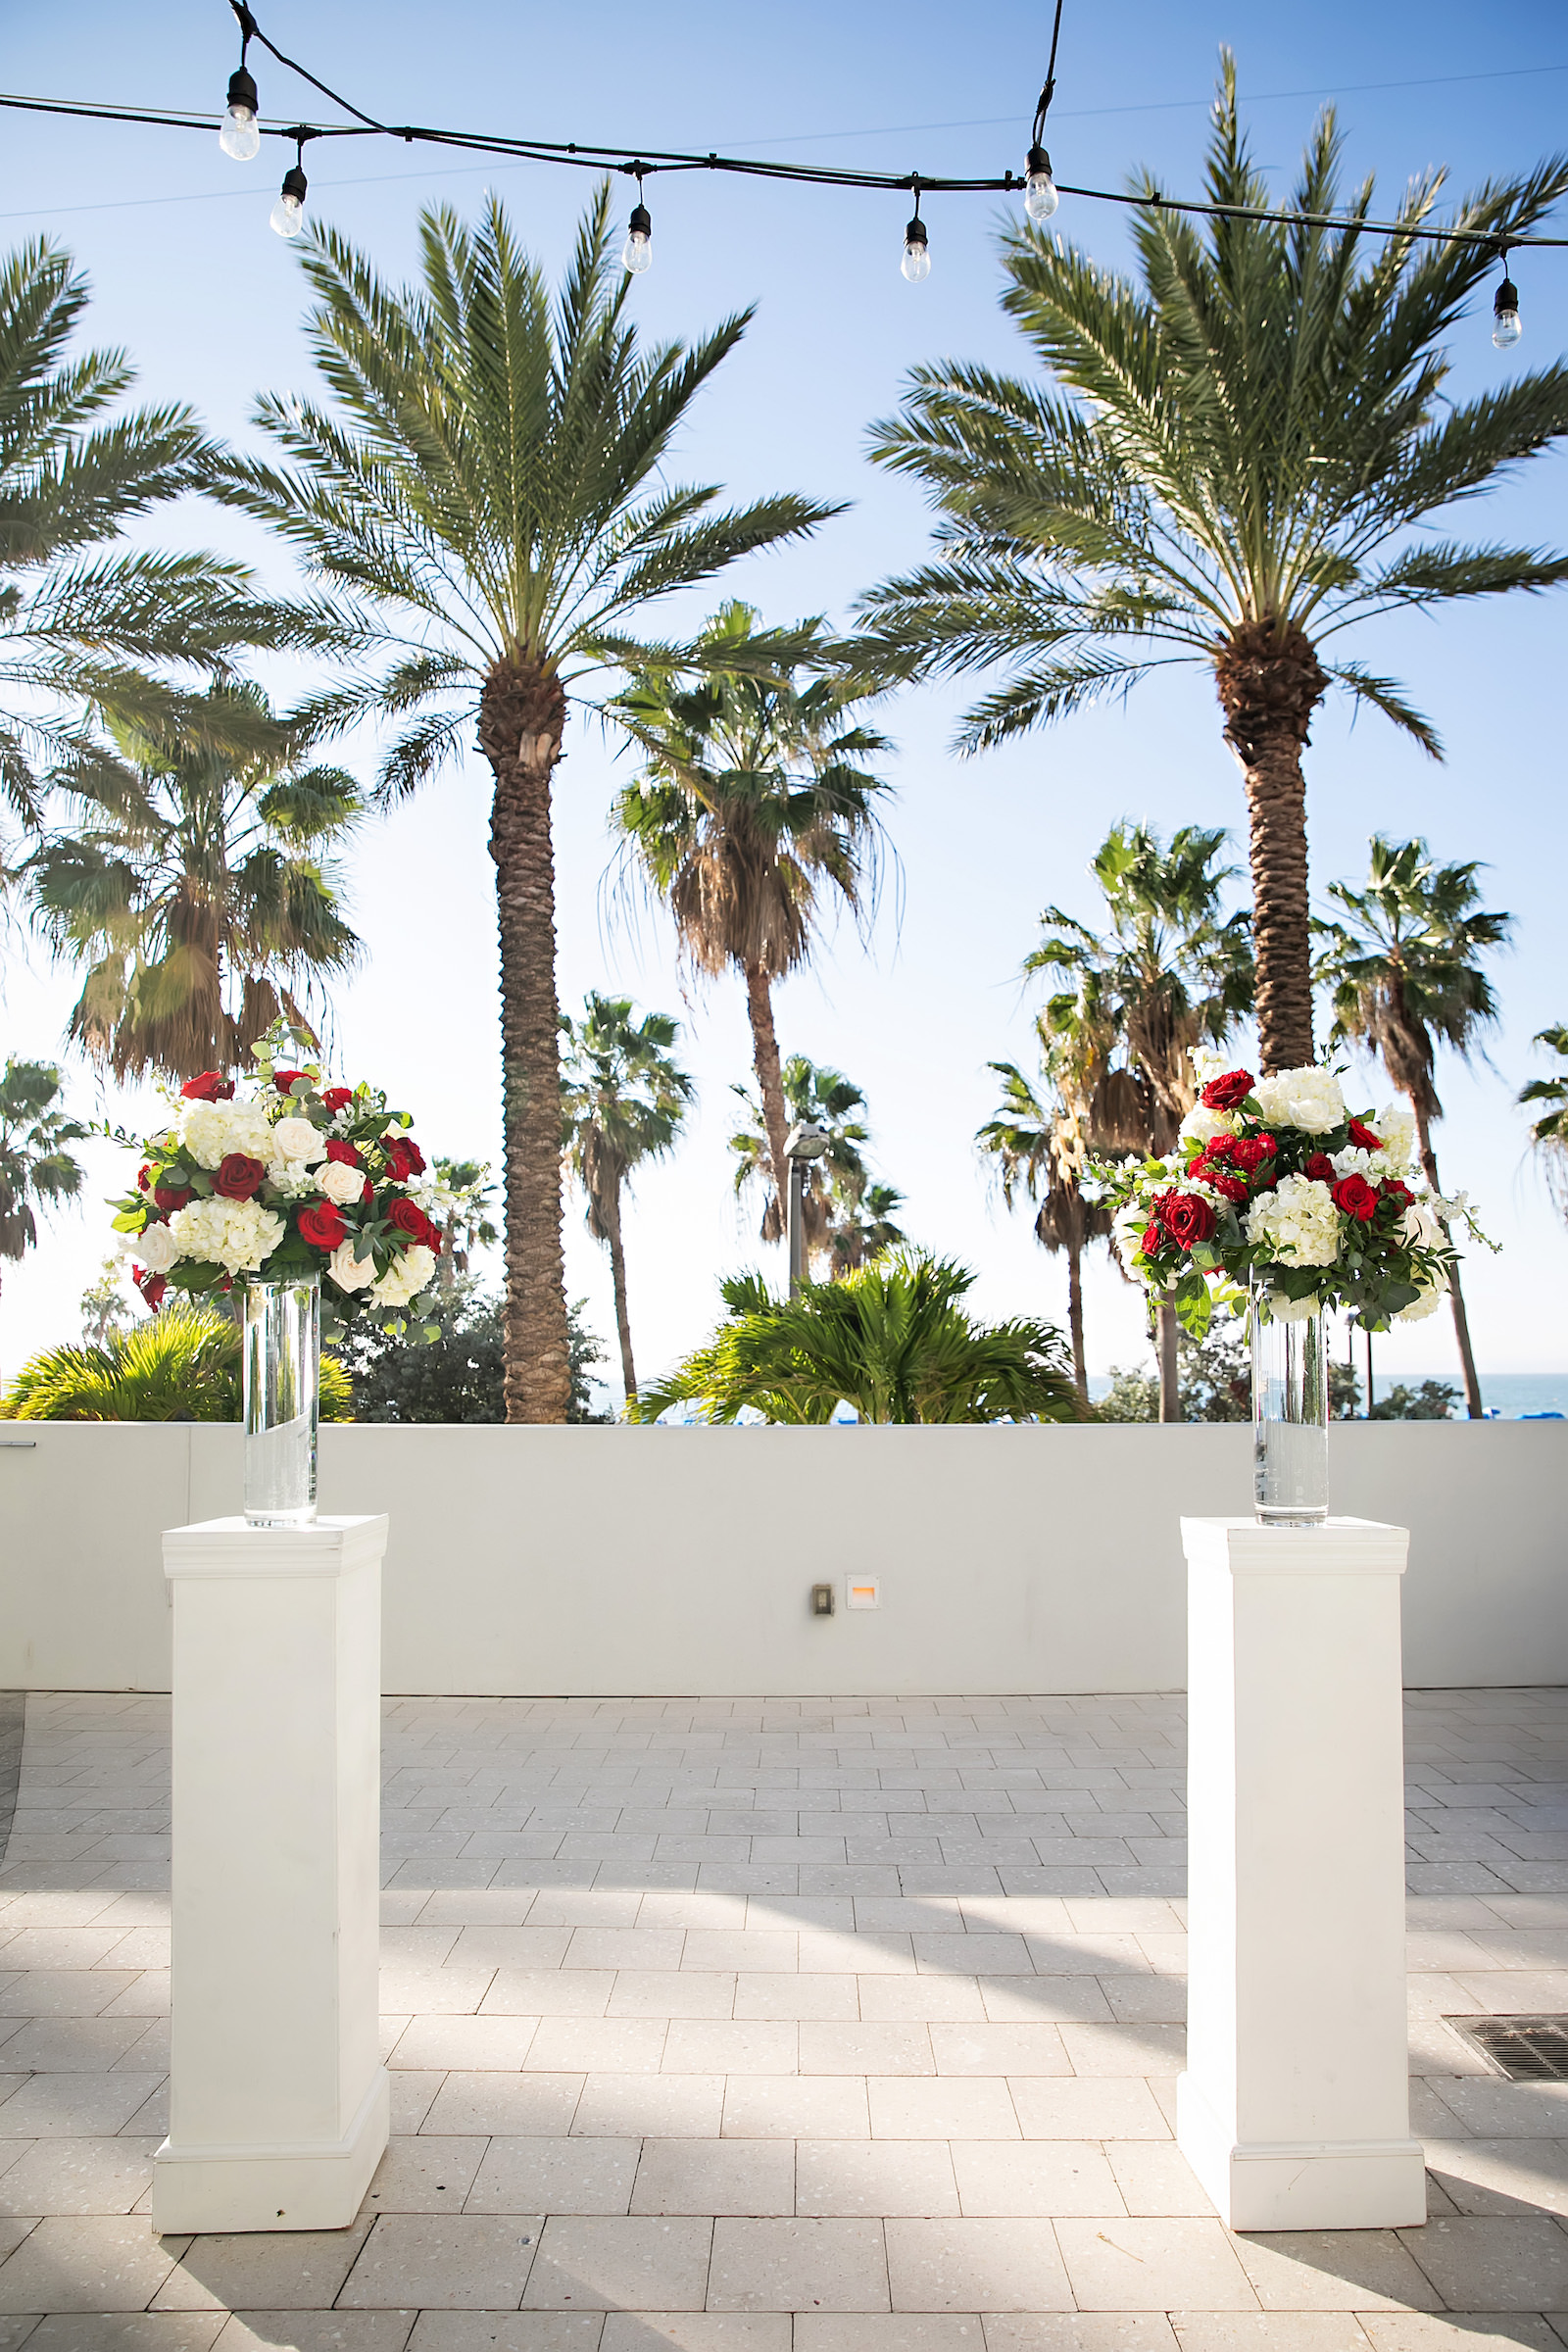 Outdoor Modern Wedding Ceremony Alter with Red and White Rose Bouquet | Florida Florist Save the Date Florida | Florida Wedding Venue Wyndham Grand Clearwater Beach